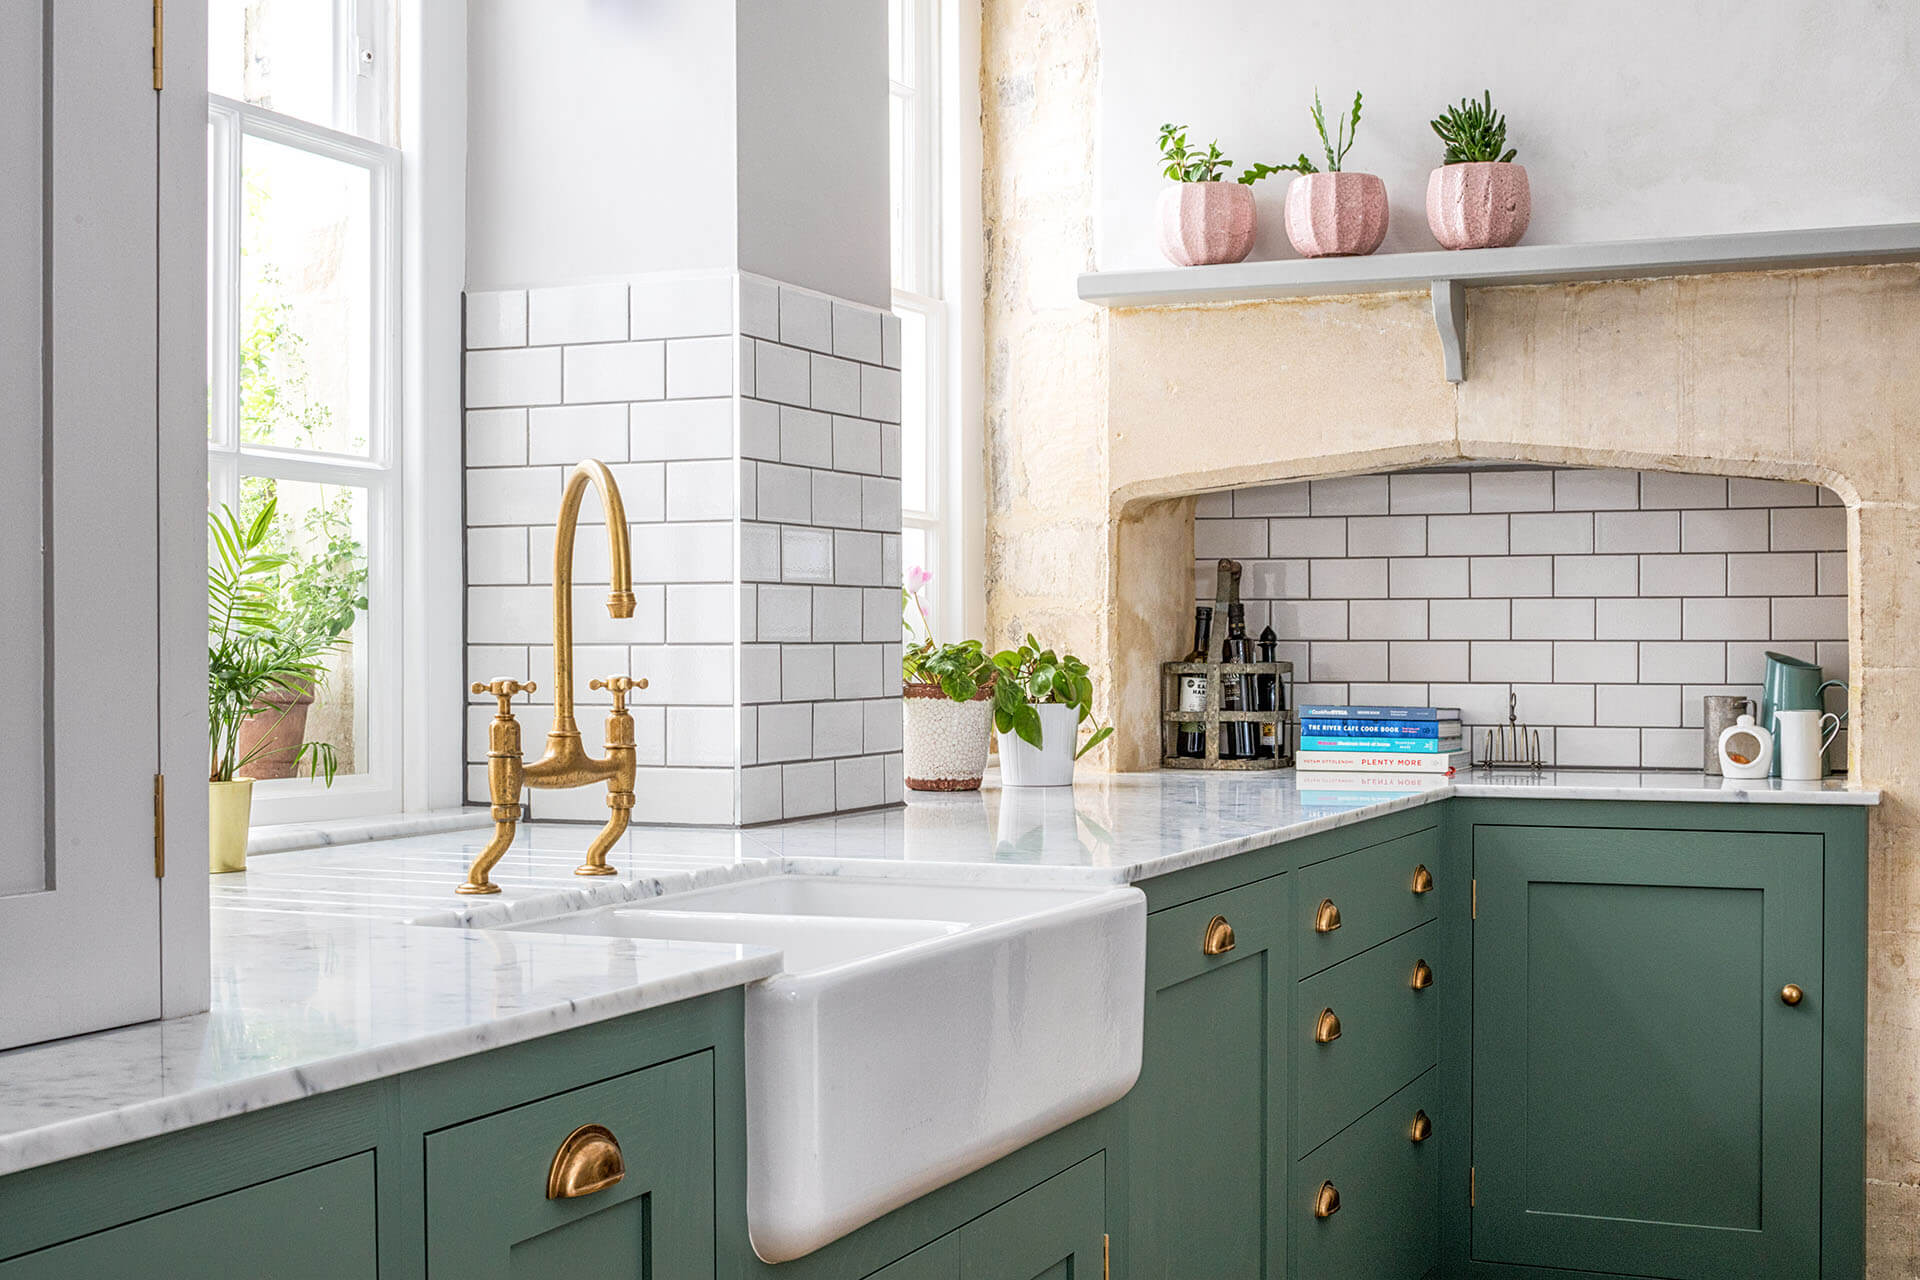 Shaws Double Bowl 800 fireclay sink. Kitcehn design by Sustainable Kitchens UK. Imported and distributed in Australia by Luxe by Design, Brisbane.